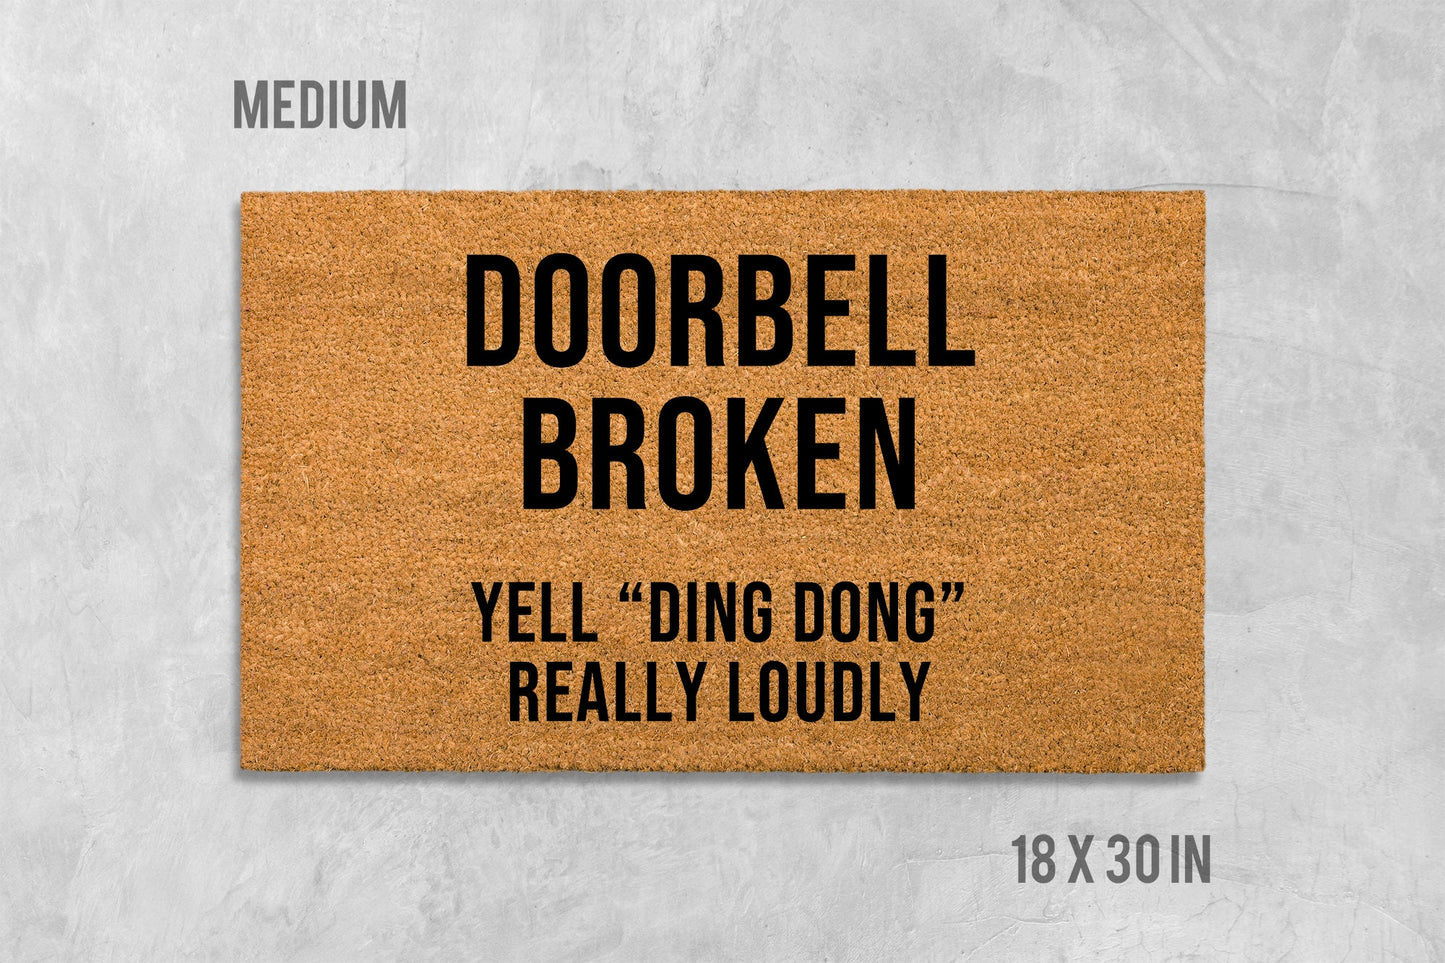 Doorbell Broken, Yell "Ding Dong" Really Loudly